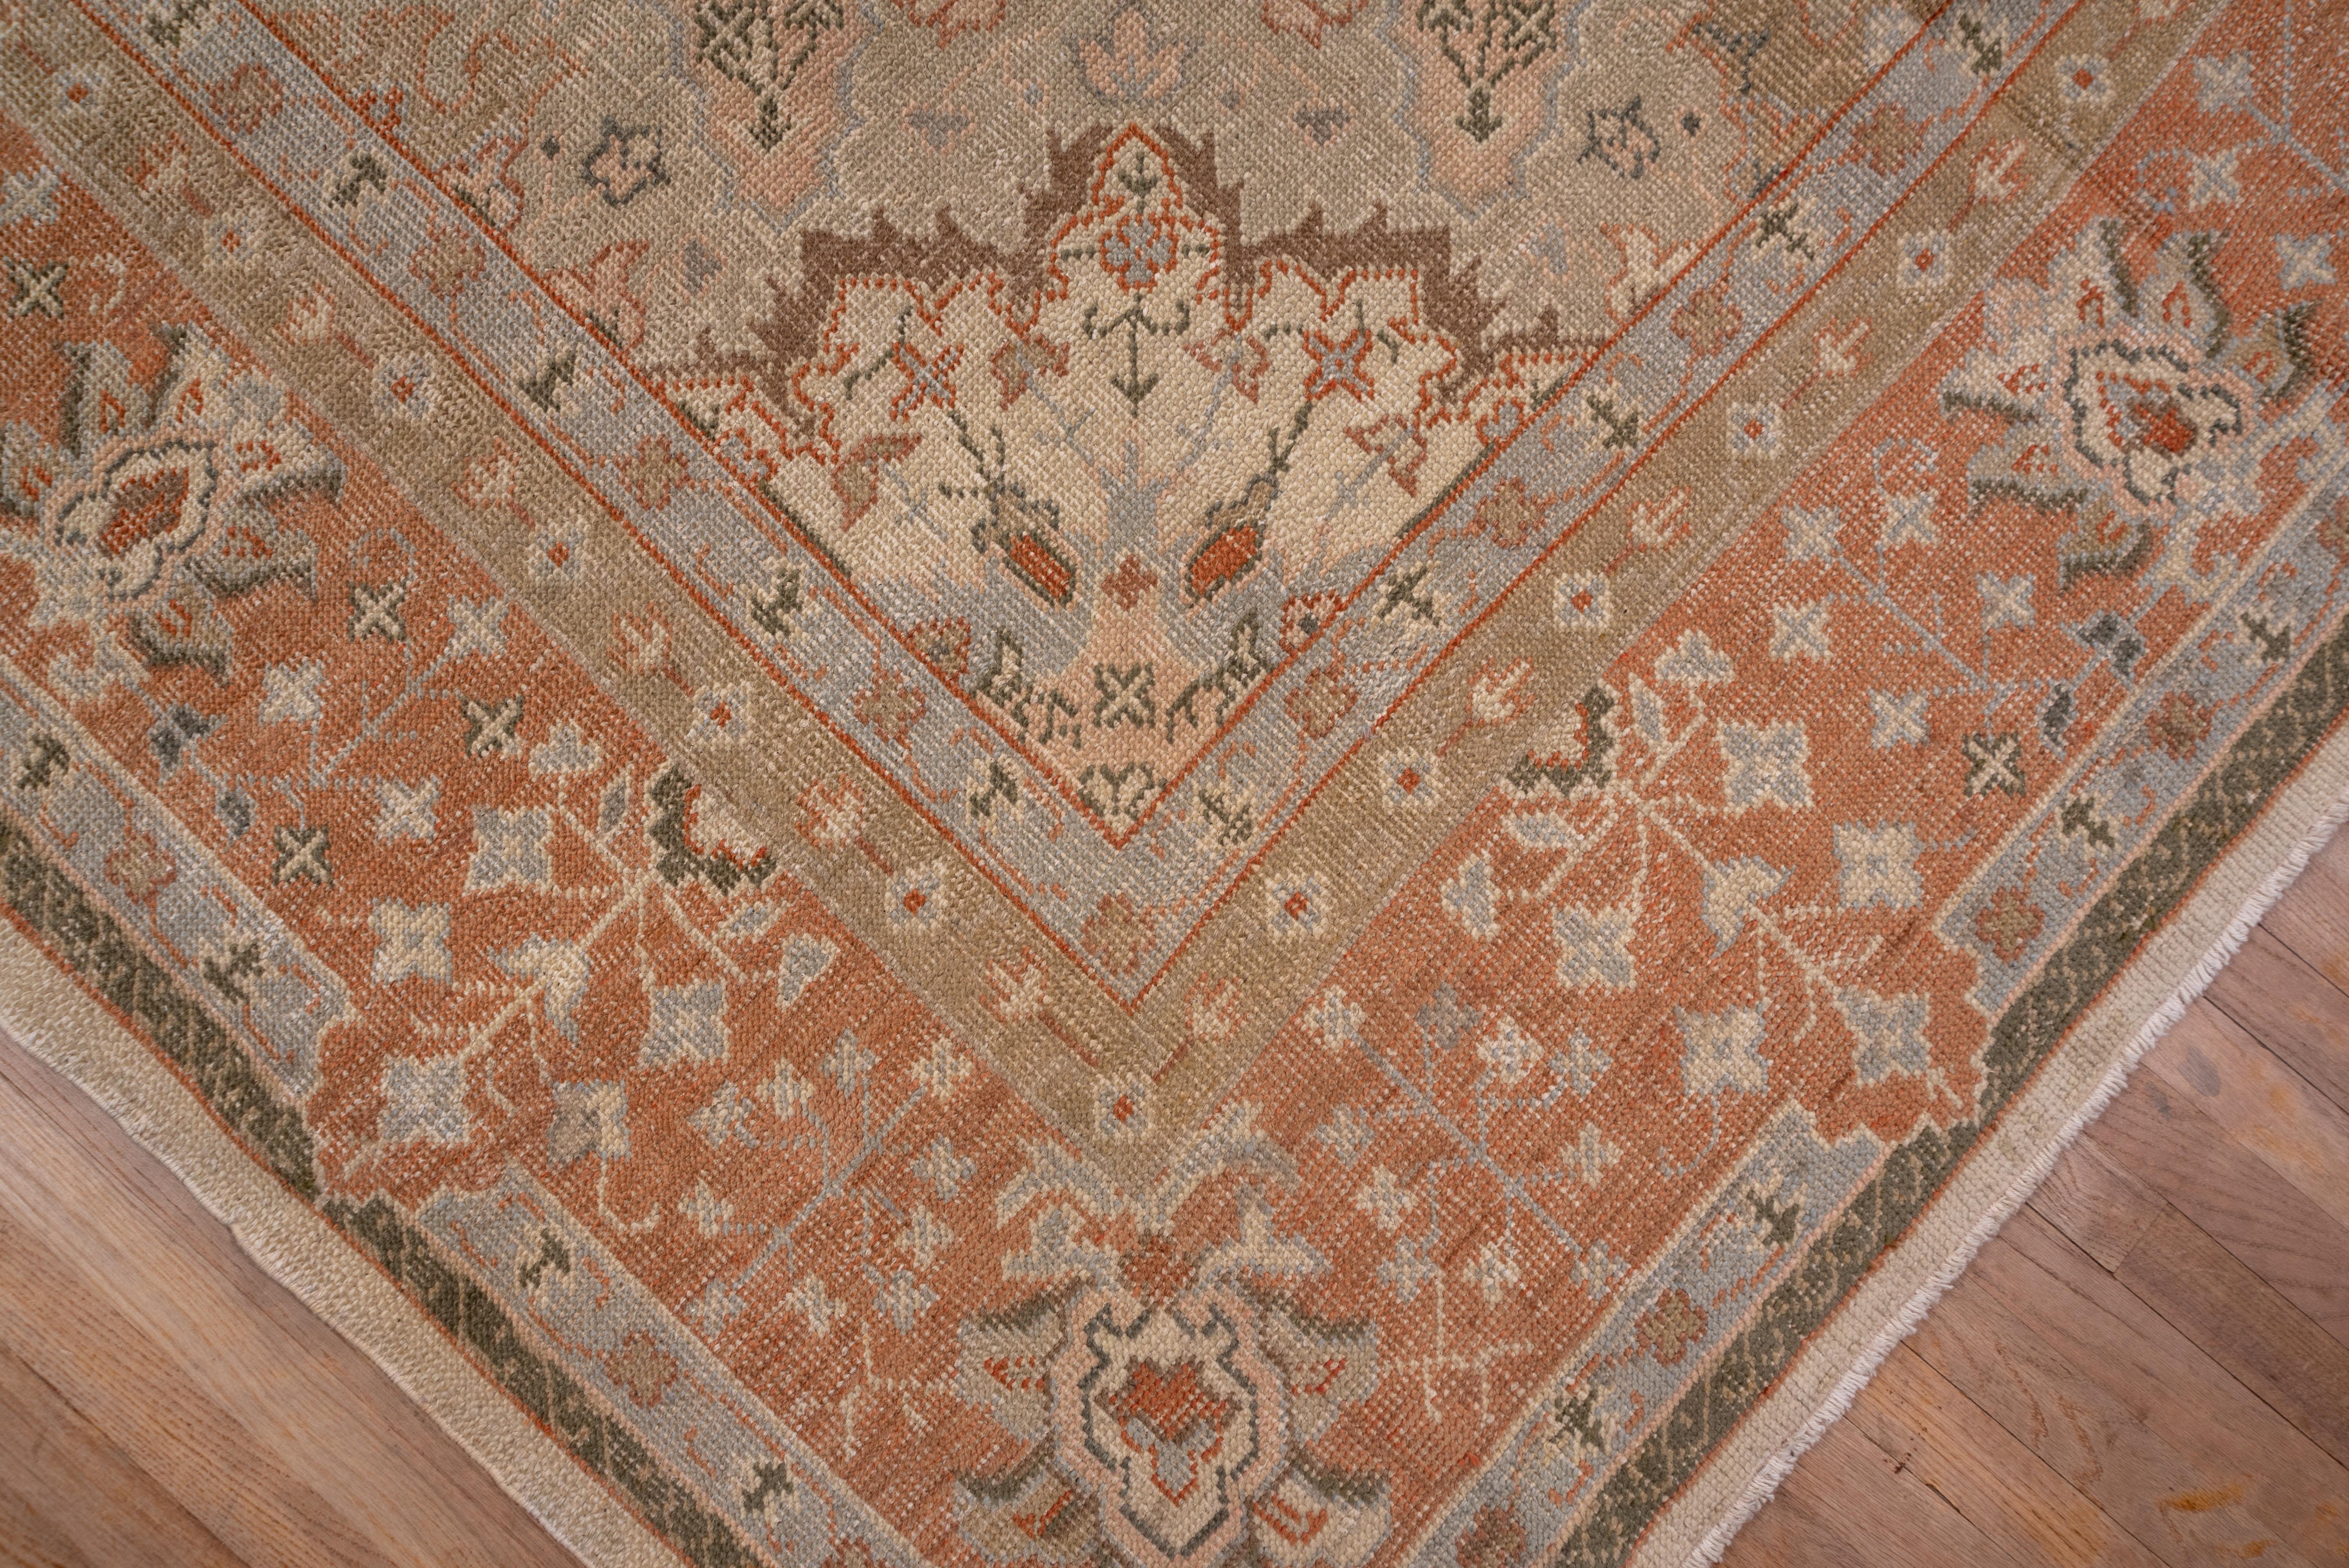 Antique Oversized Oushak Carpet, Salmon Palette, circa 1920 In Excellent Condition For Sale In New York, NY